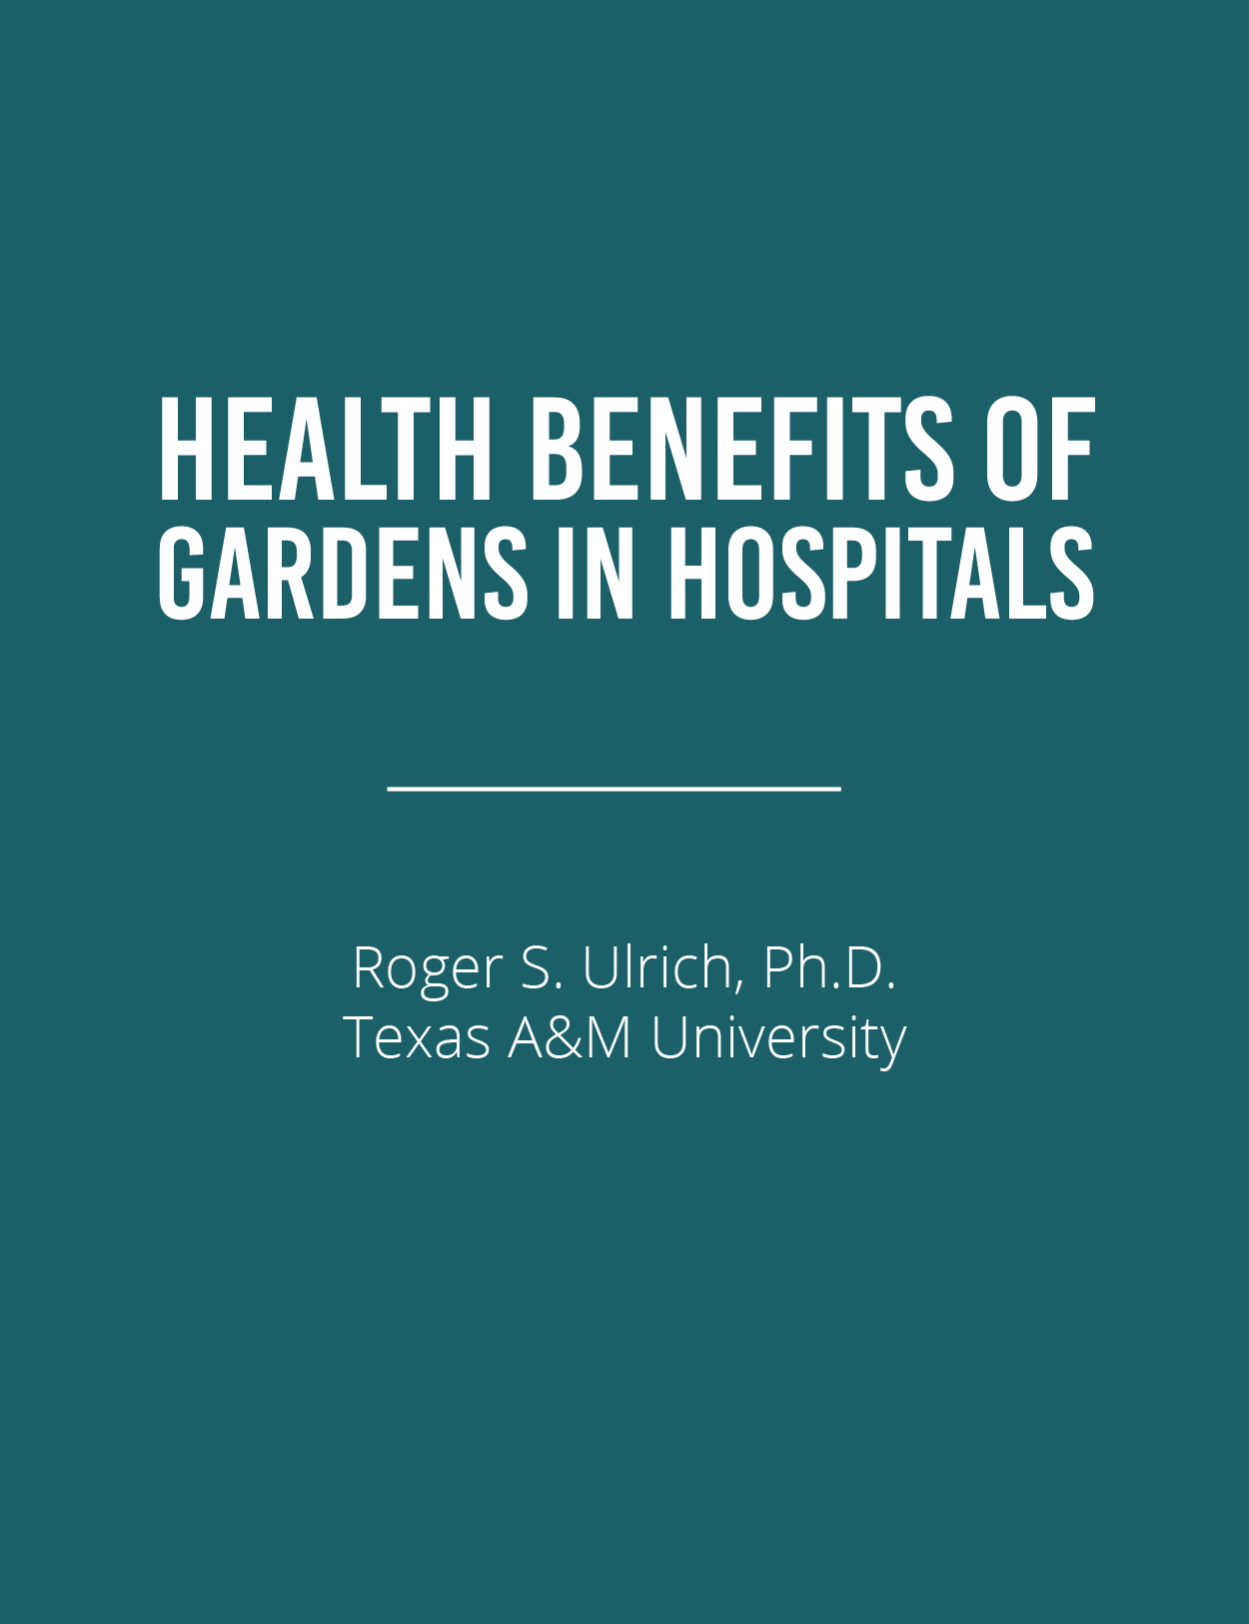 Health Benefits of Gardens in HospitalsFeatured Image